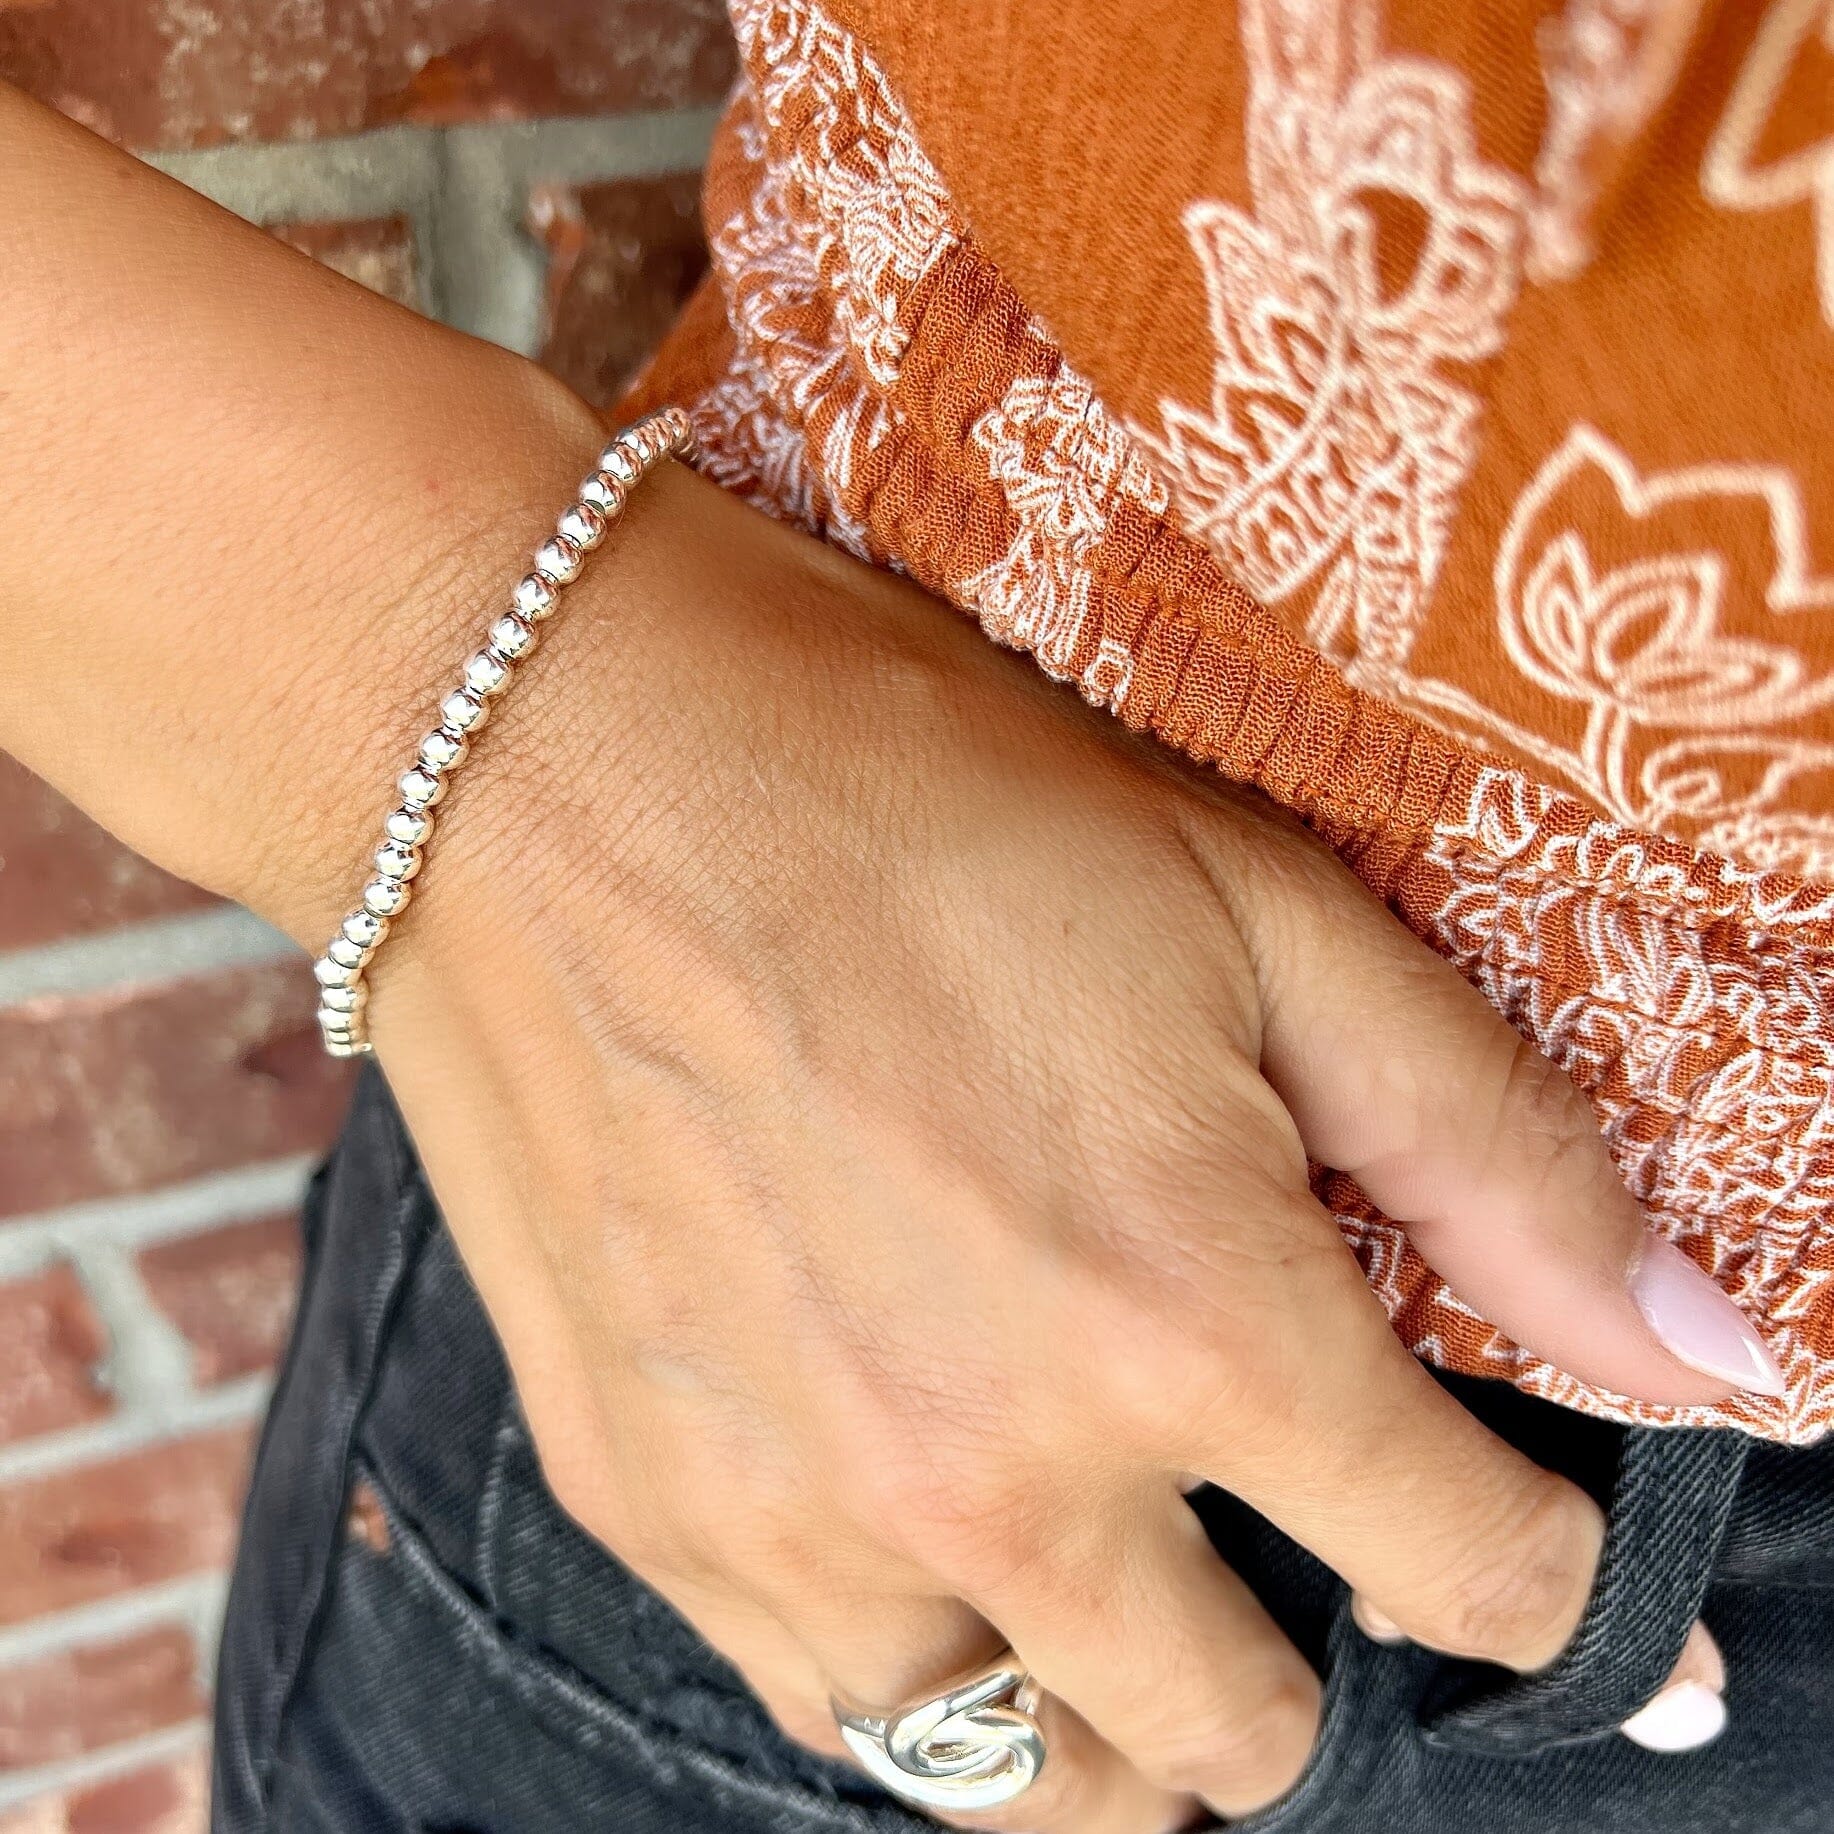 4mm Beaded Stack Bracelet featured with Sisters ring